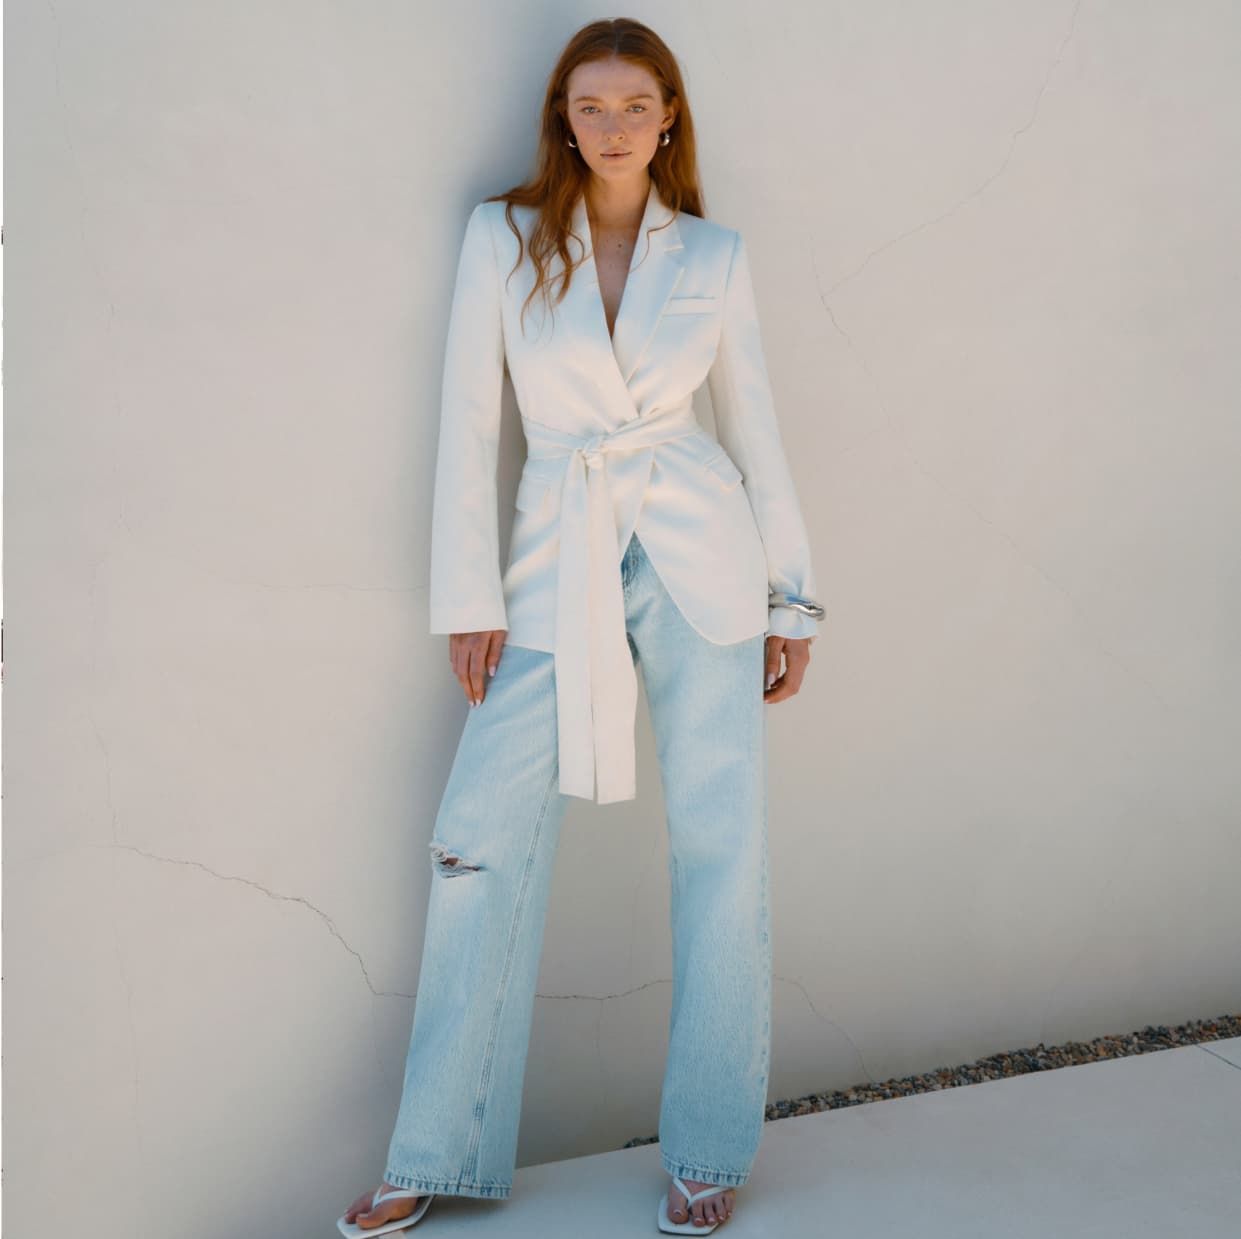 A model wears an white belted blazer with light blue jeans.